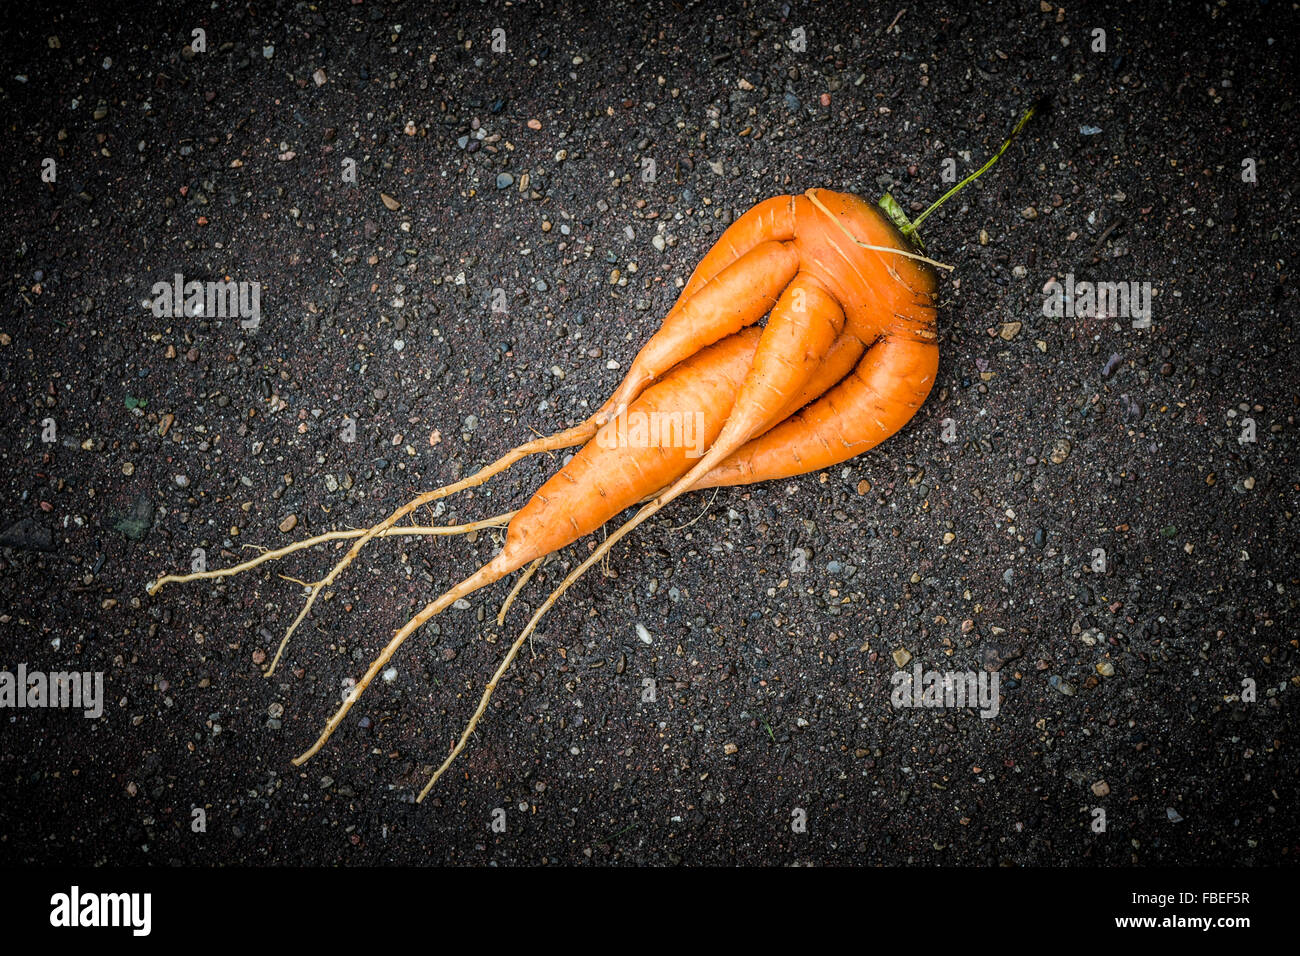 Imperfect Fresh Carrot Stock Photo